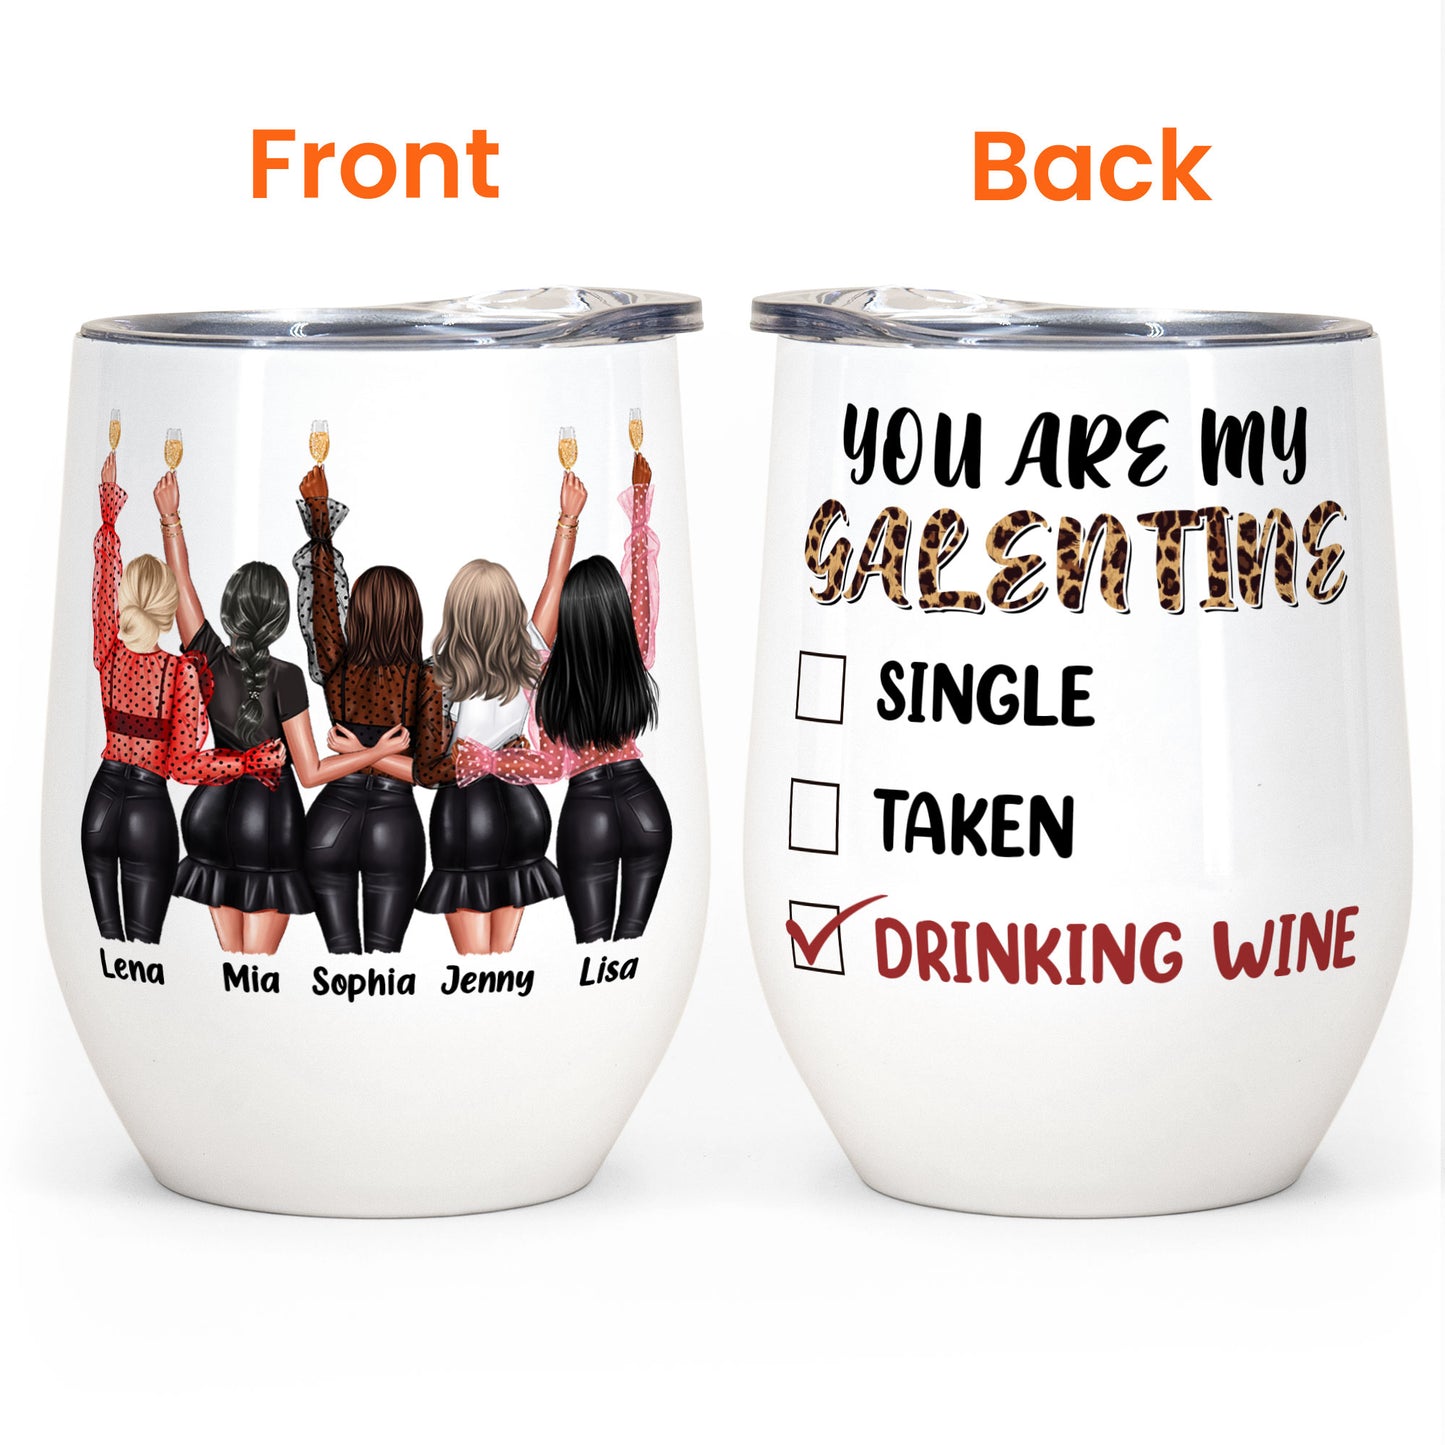 You Are My Galentine - Personalized Wine Tumbler - Birthday, Galentine's Day Gift For Friends, Girl Squad, Wine Lovers